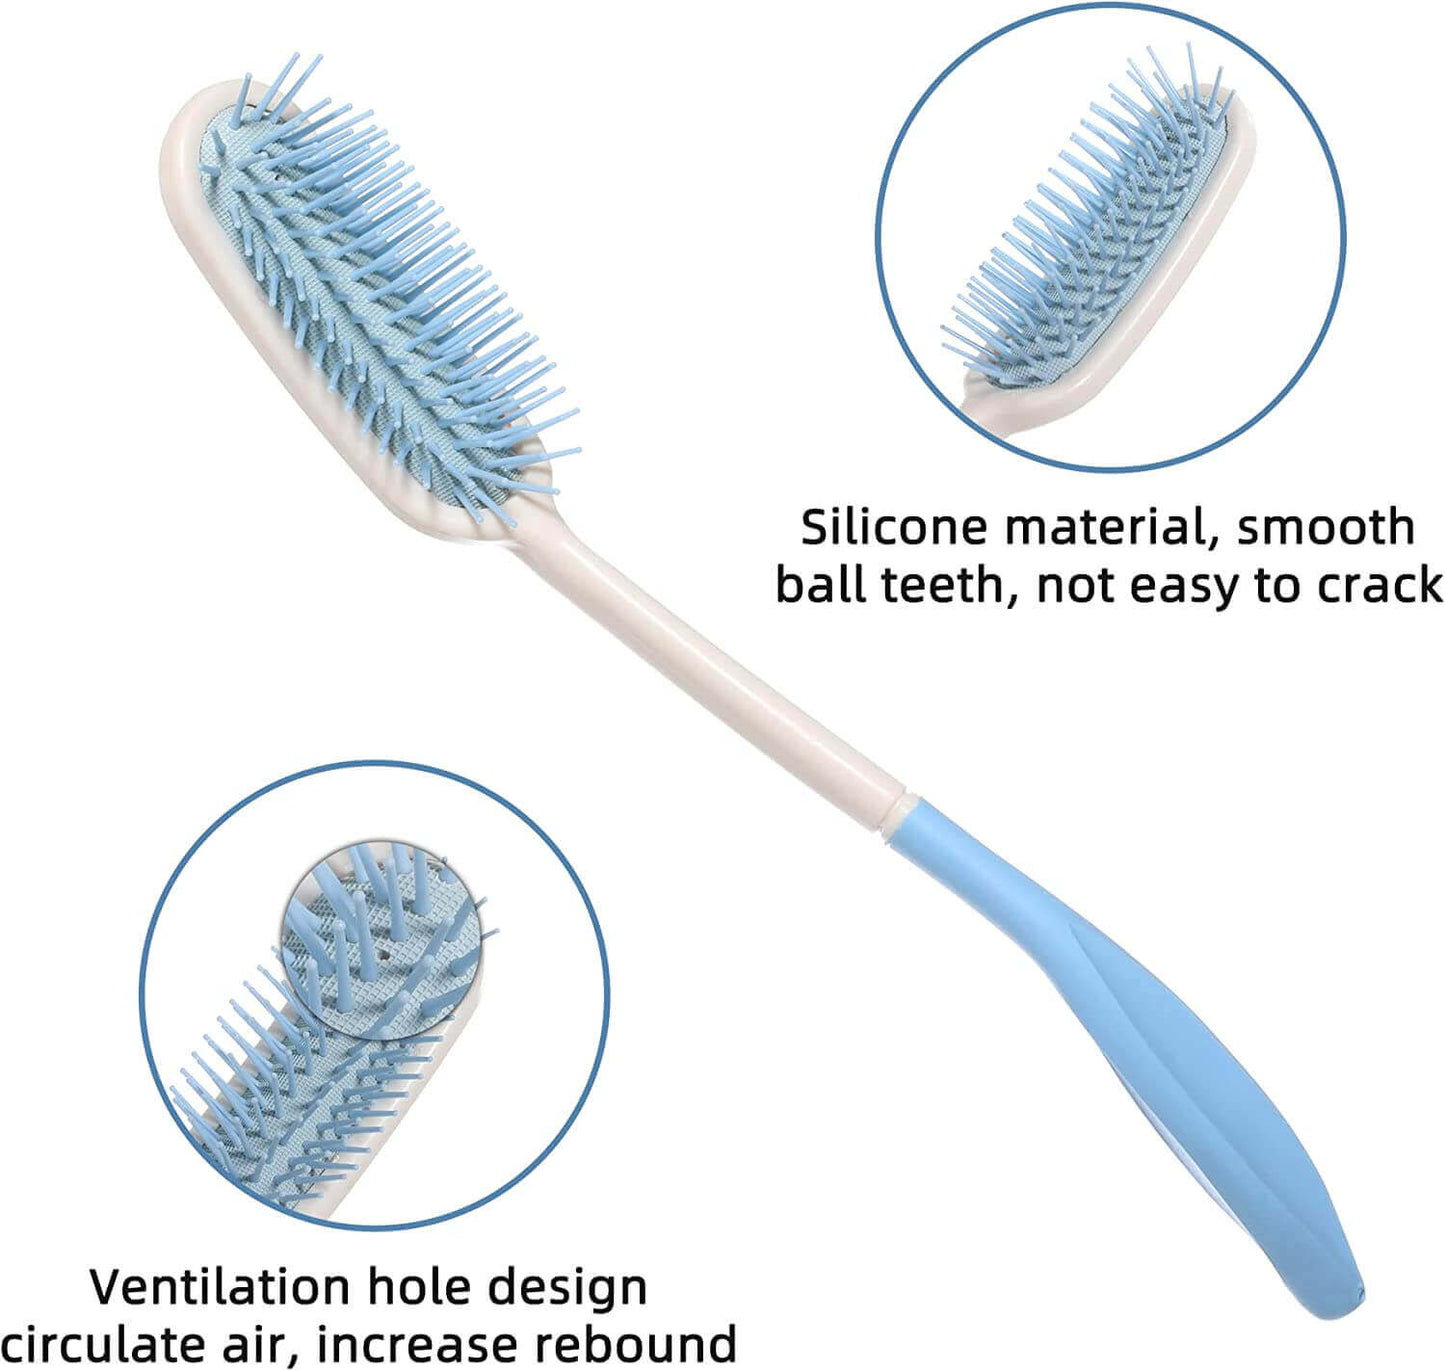 Fanwer's long-handle hair brush and comb, product material